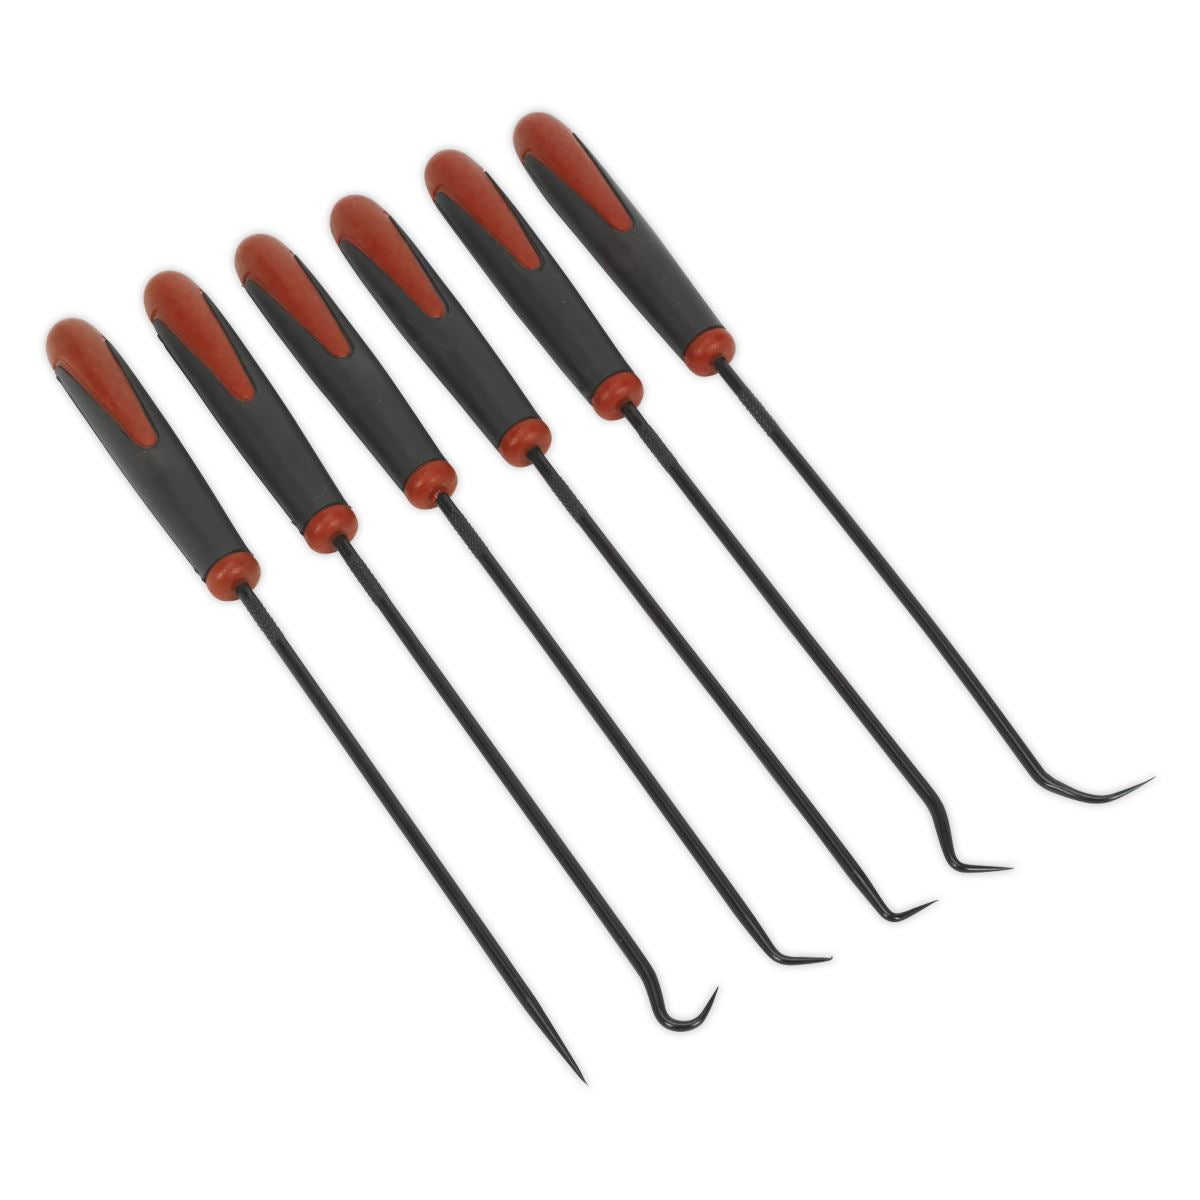 Sealey Hook and Pick Set Extra Long 6 Piece